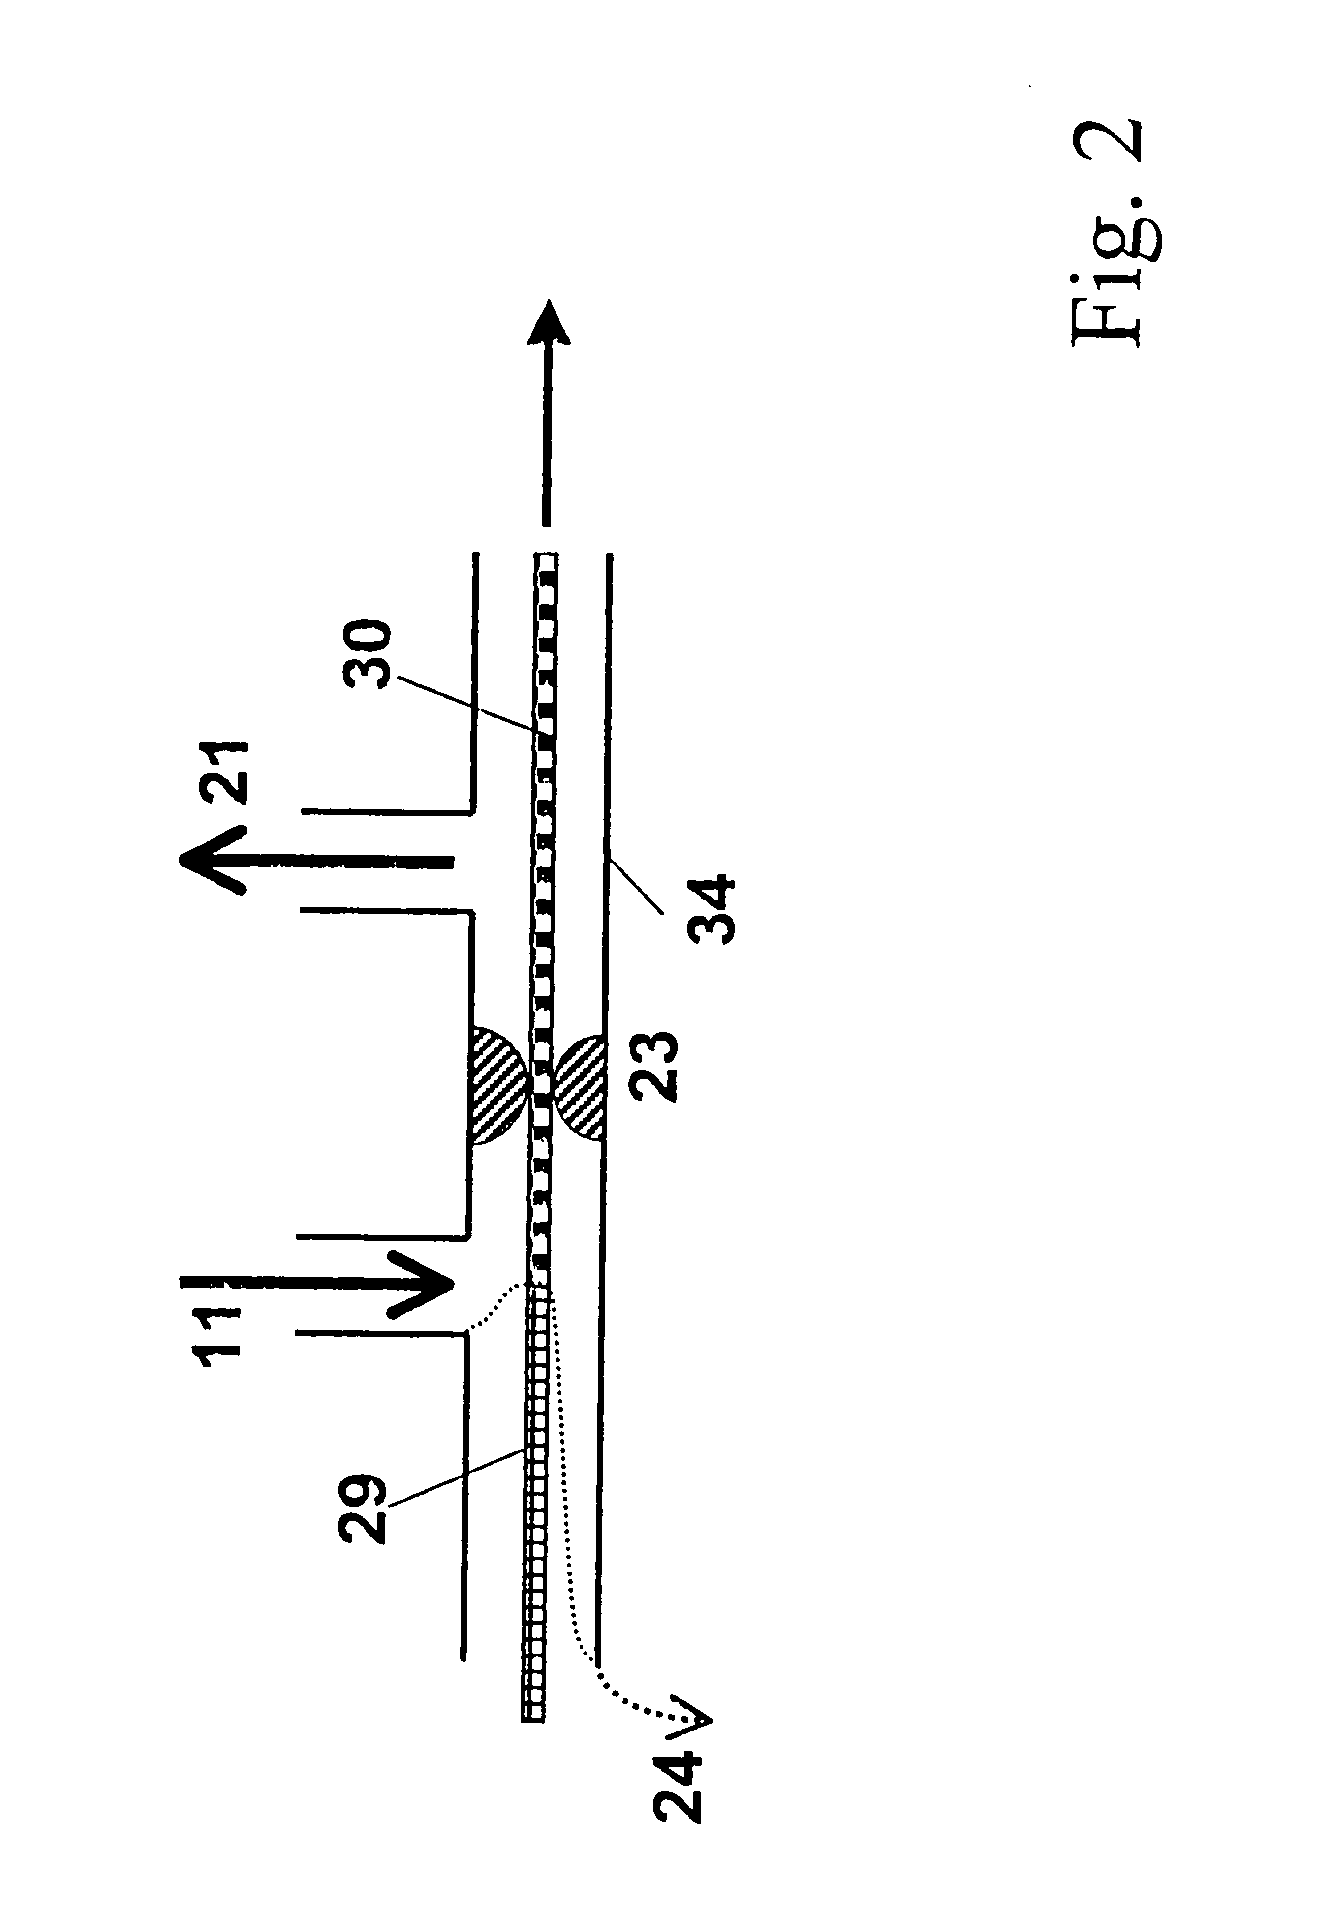 Method for producing composite materials using a thermoplastic matrix